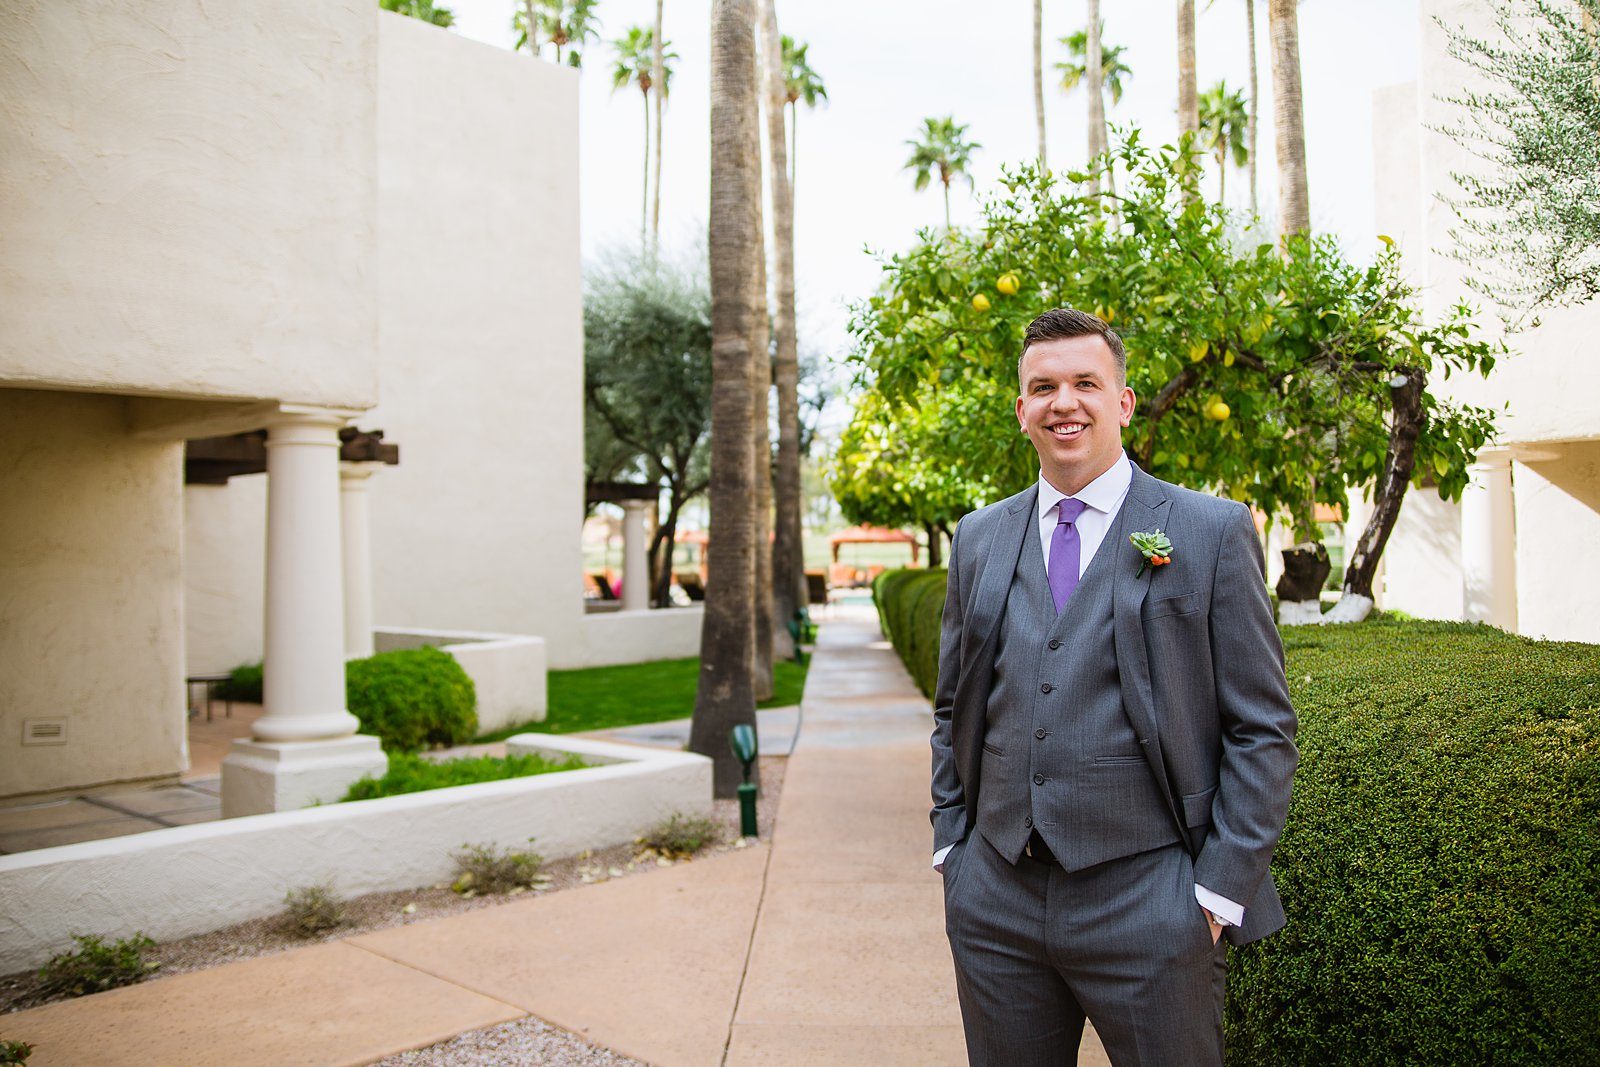 Groom's grey suit with purple tie for his The Scottsdale Resort at McCormick Ranch wedding by PMA Photography.